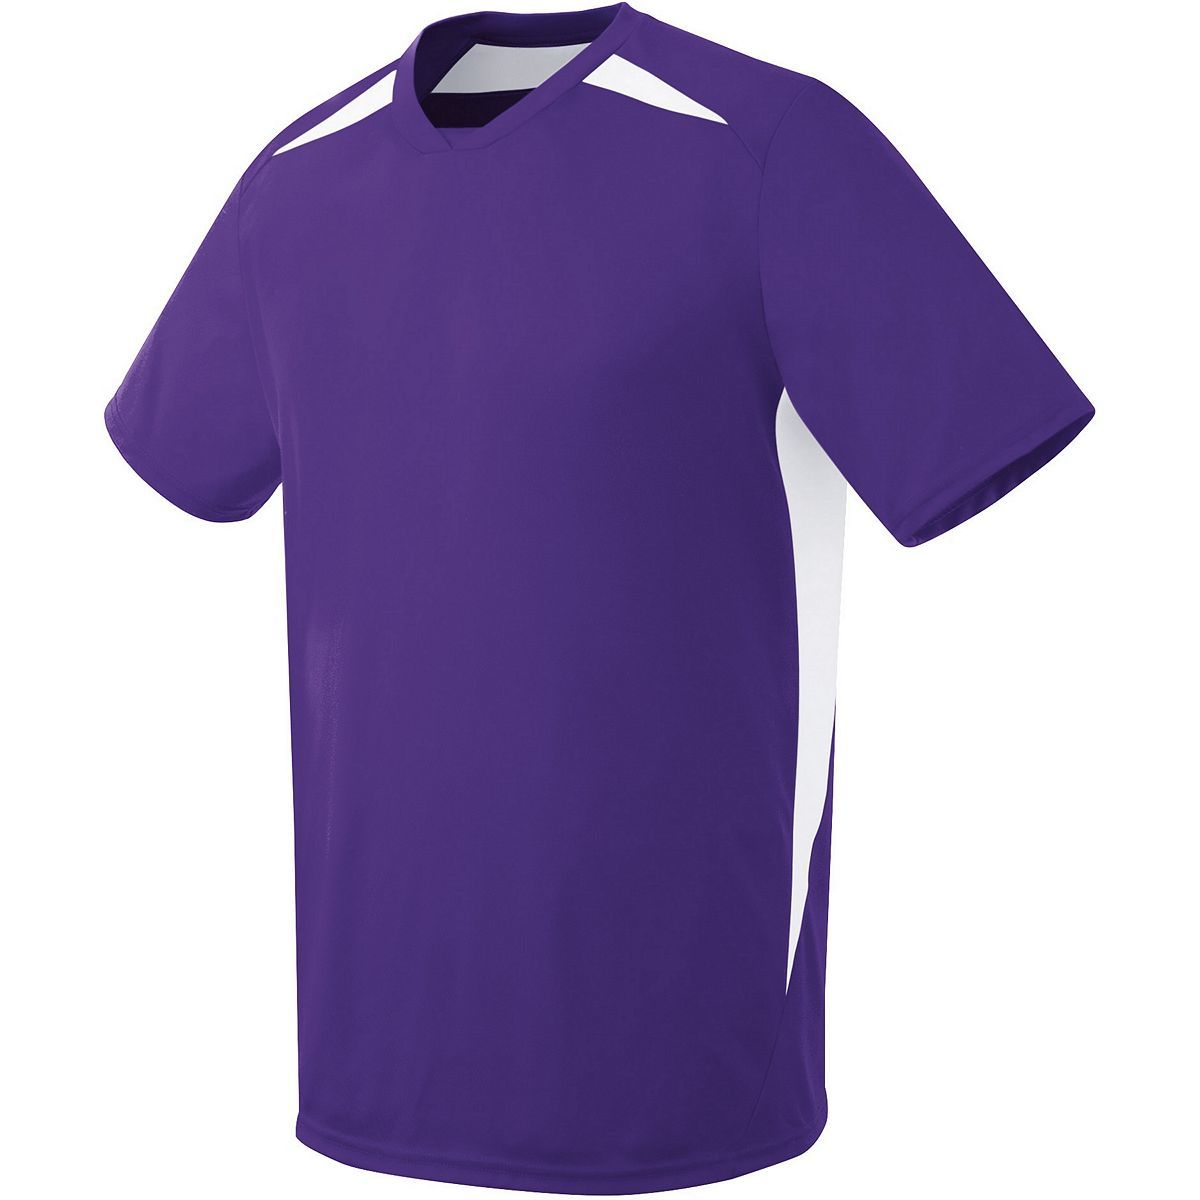 High 5 Youth Hawk Jersey in Purple/White  -Part of the Youth, Youth-Jersey, High5-Products, Soccer, Shirts, All-Sports-1 product lines at KanaleyCreations.com